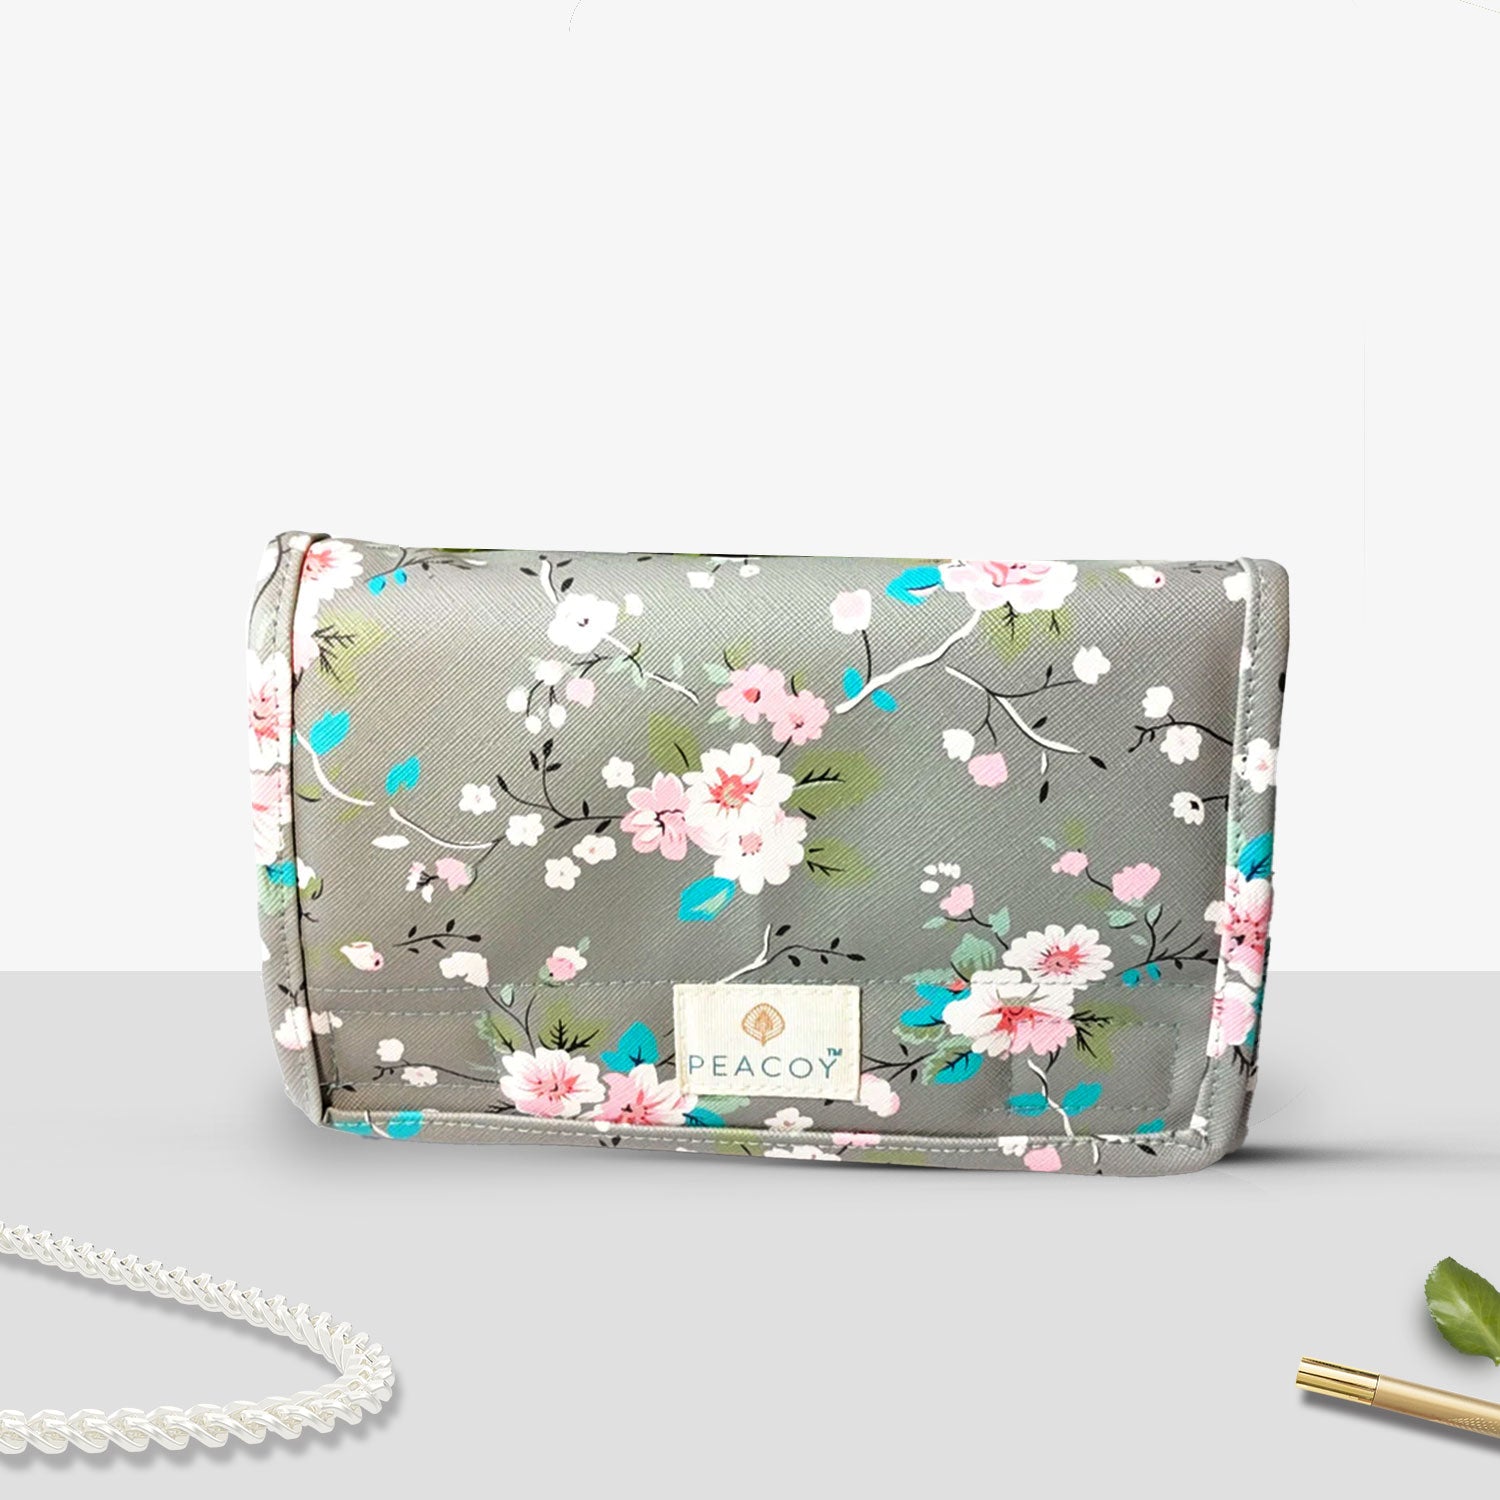 Travel Kits for Cosmetics and Essentials |  Toiletry Bag | Grey Brown Flower Design pouch